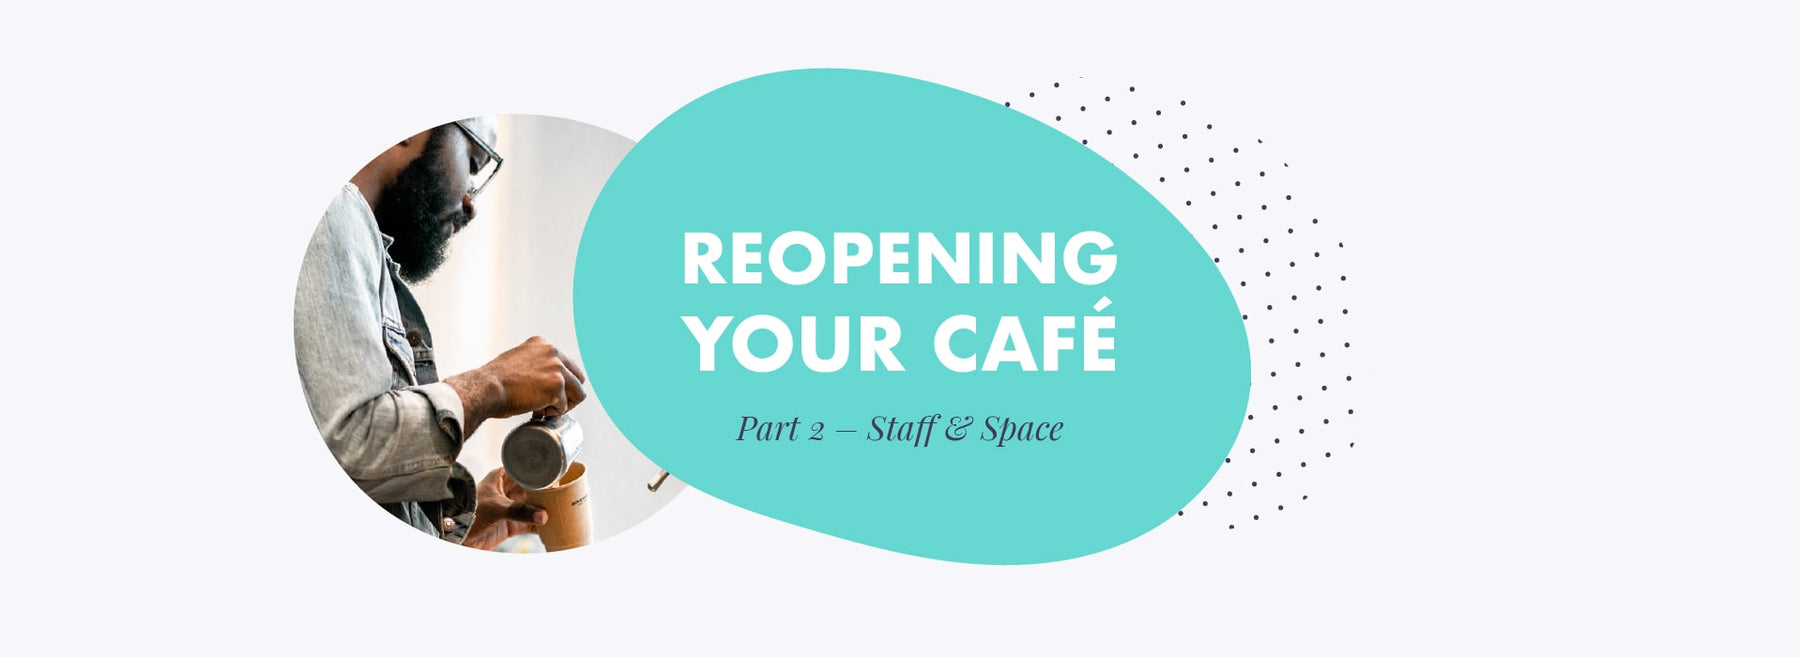 Reopening your café during Covid – Part 2 - Staff and Space